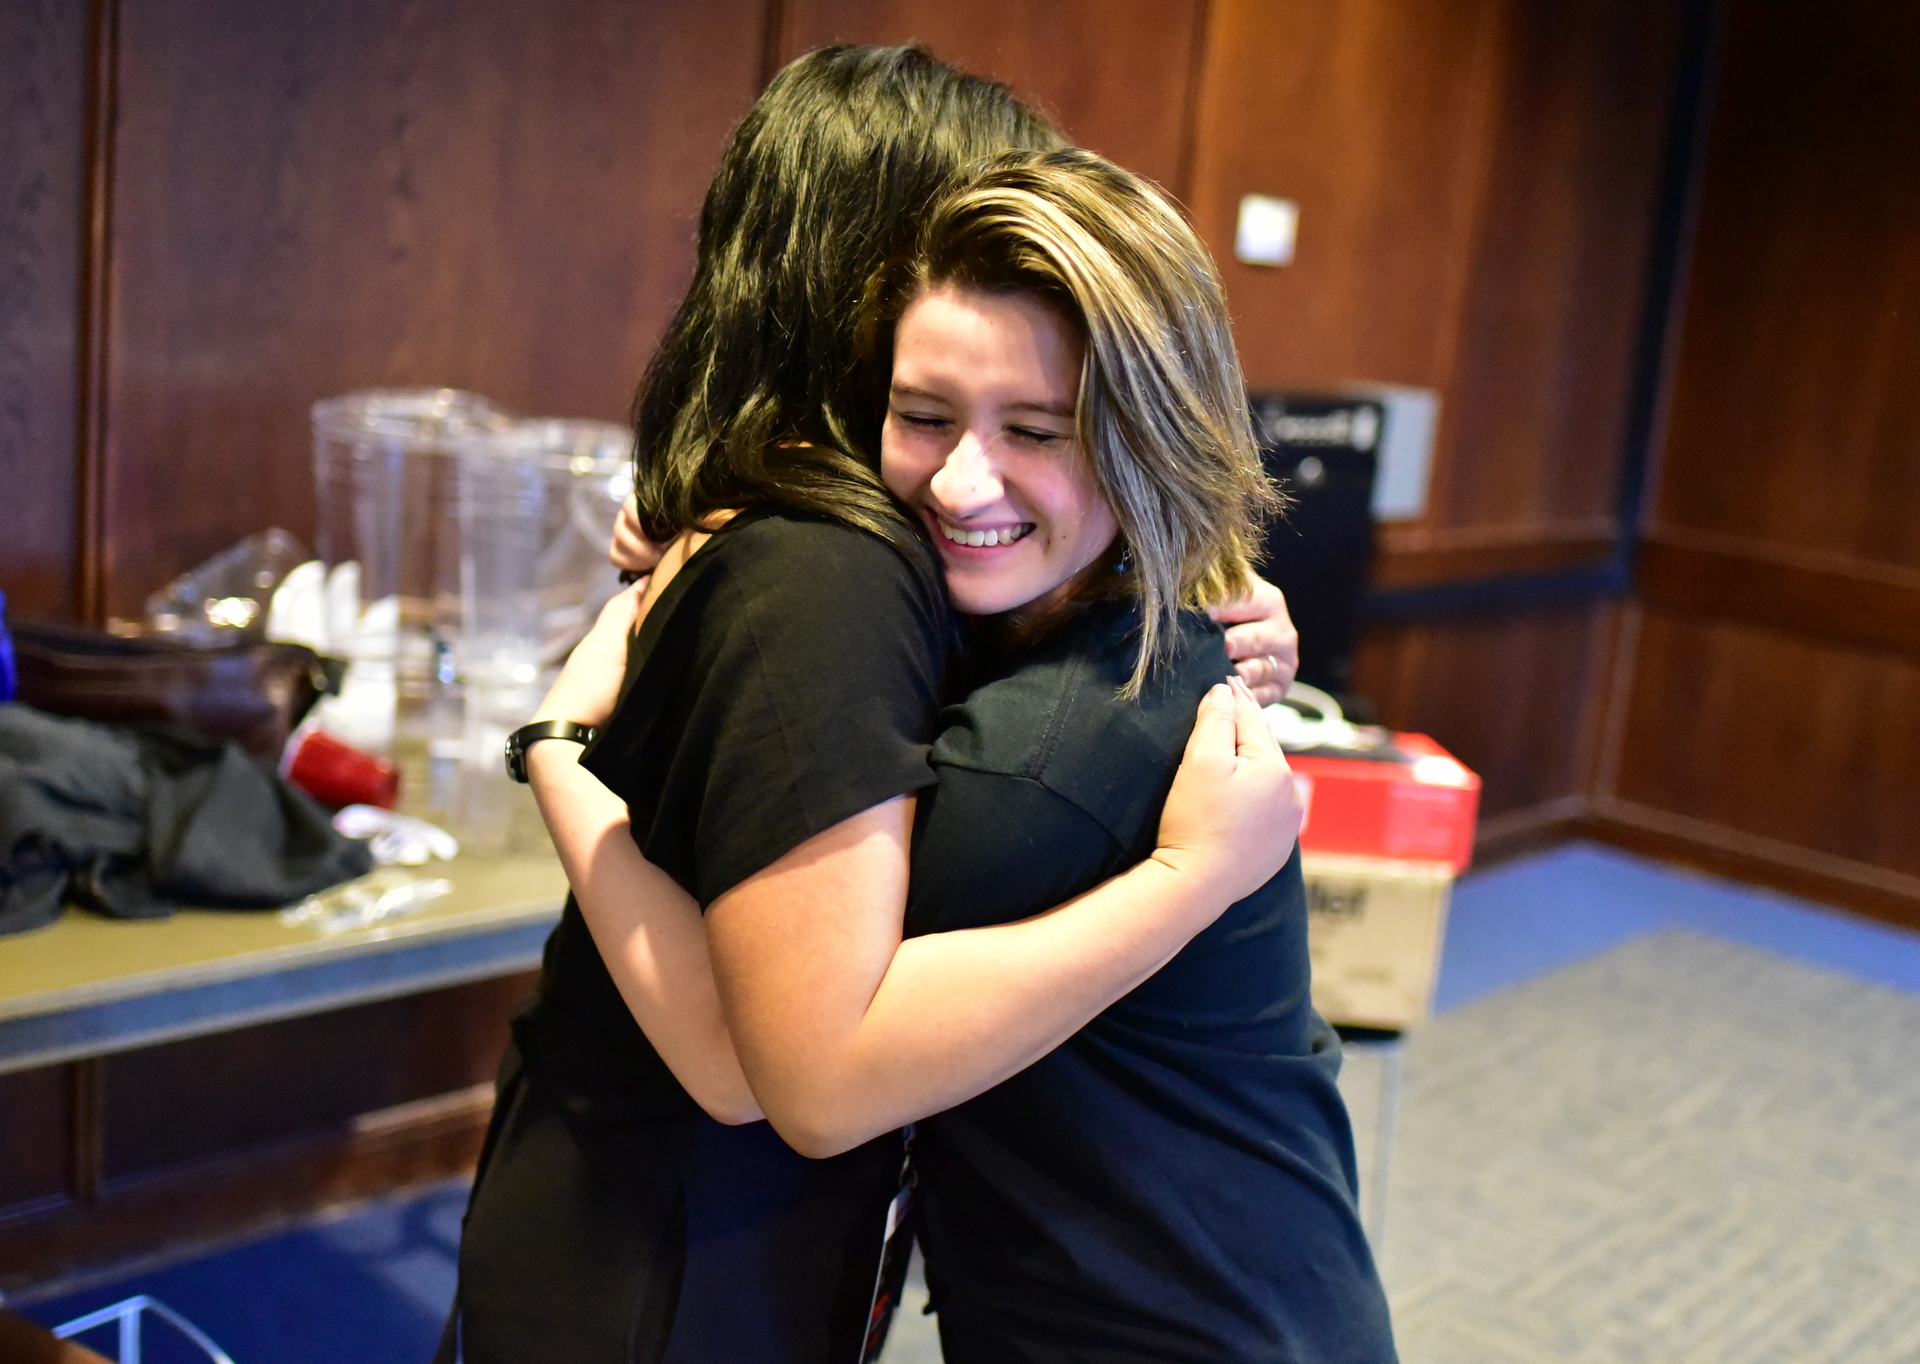 Curator Camille Raquel and Assistant-to-the-Curator Vania Arriola share a hug at the end of a long and successful TEDxCSULB 2017 event